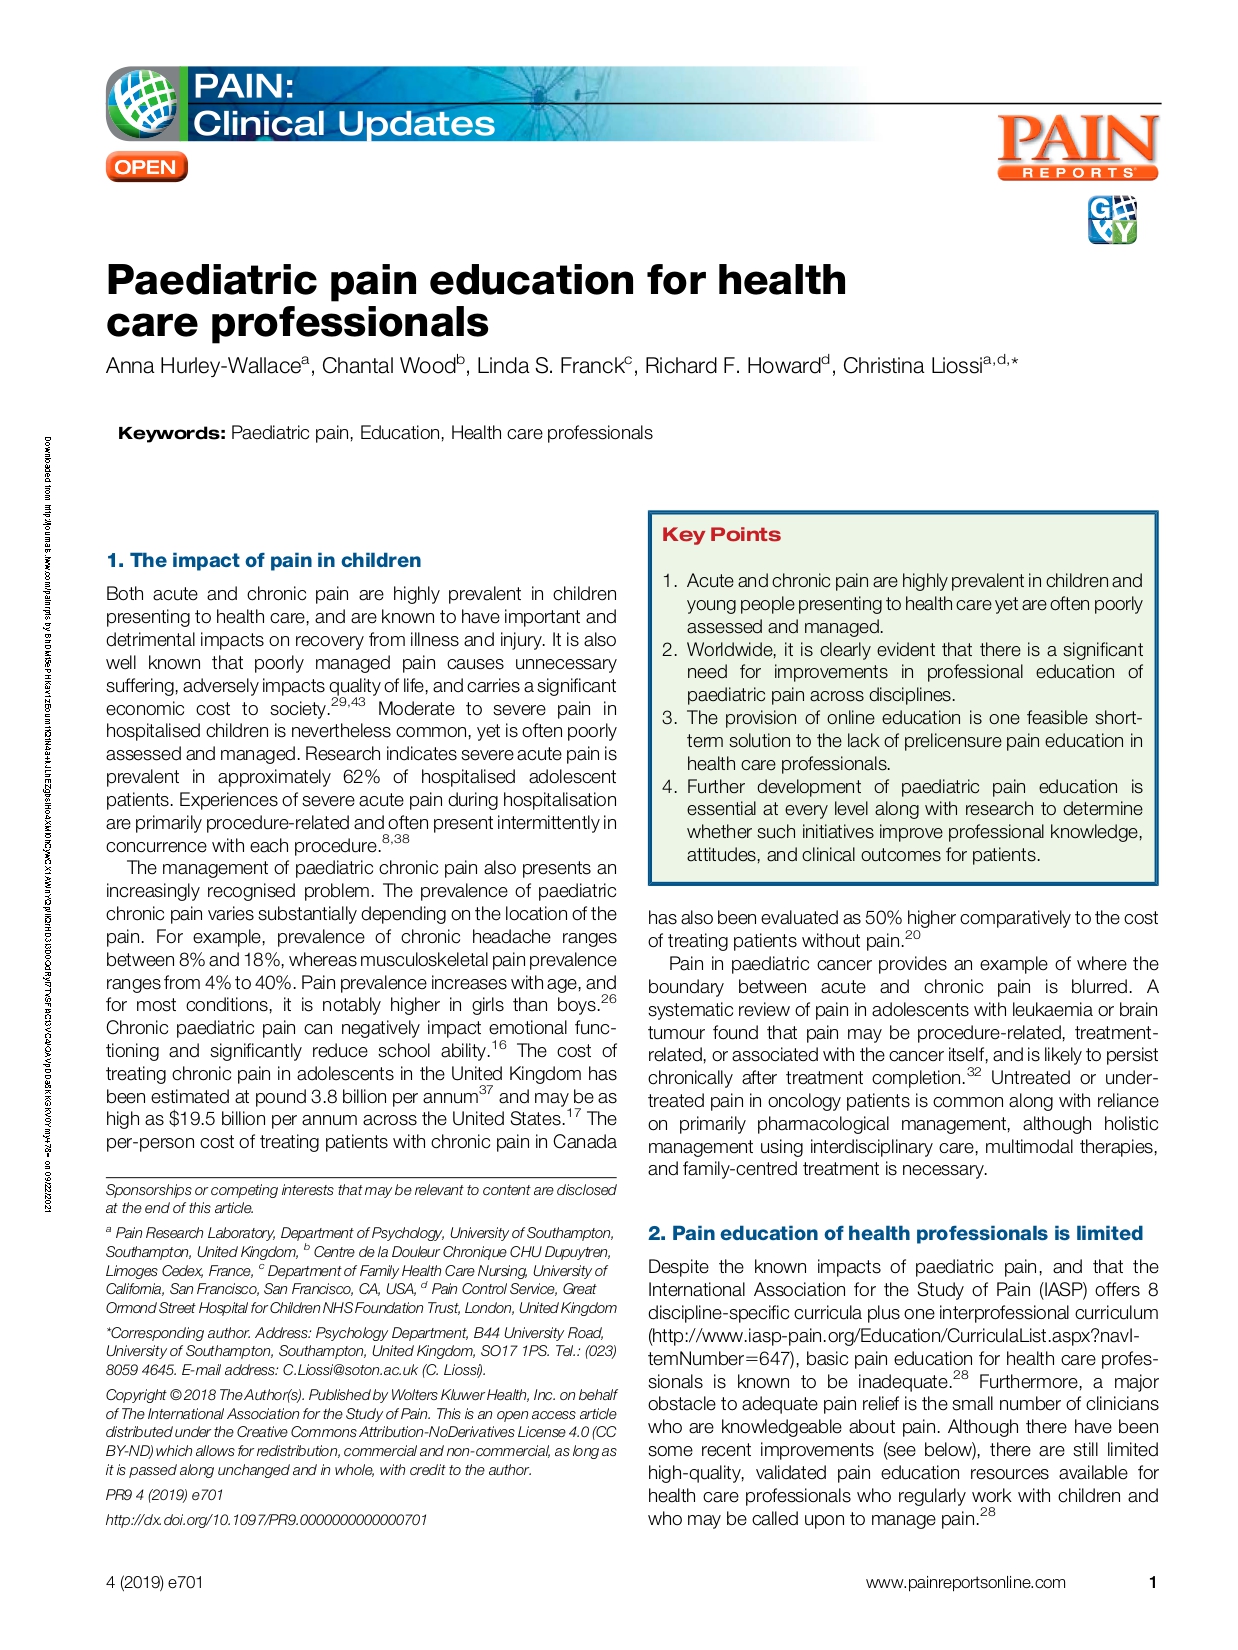 PAEDIATRIC PAIN EDUCATION FOR HEALTH CARE PROFESSIONALS